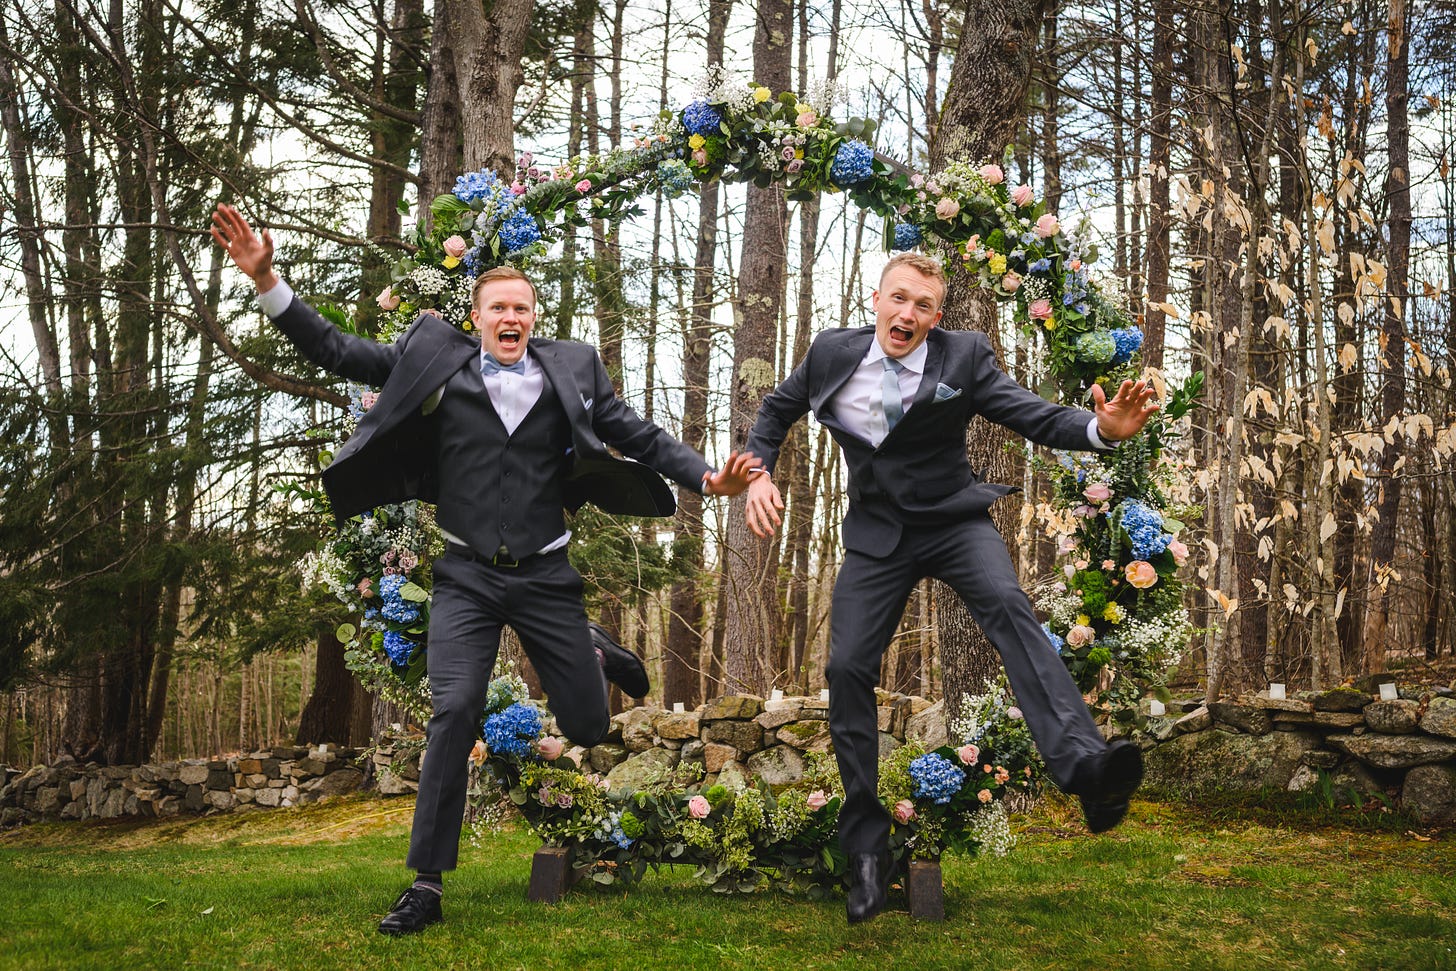 A groom and a groomsman leaping through the circular arbor